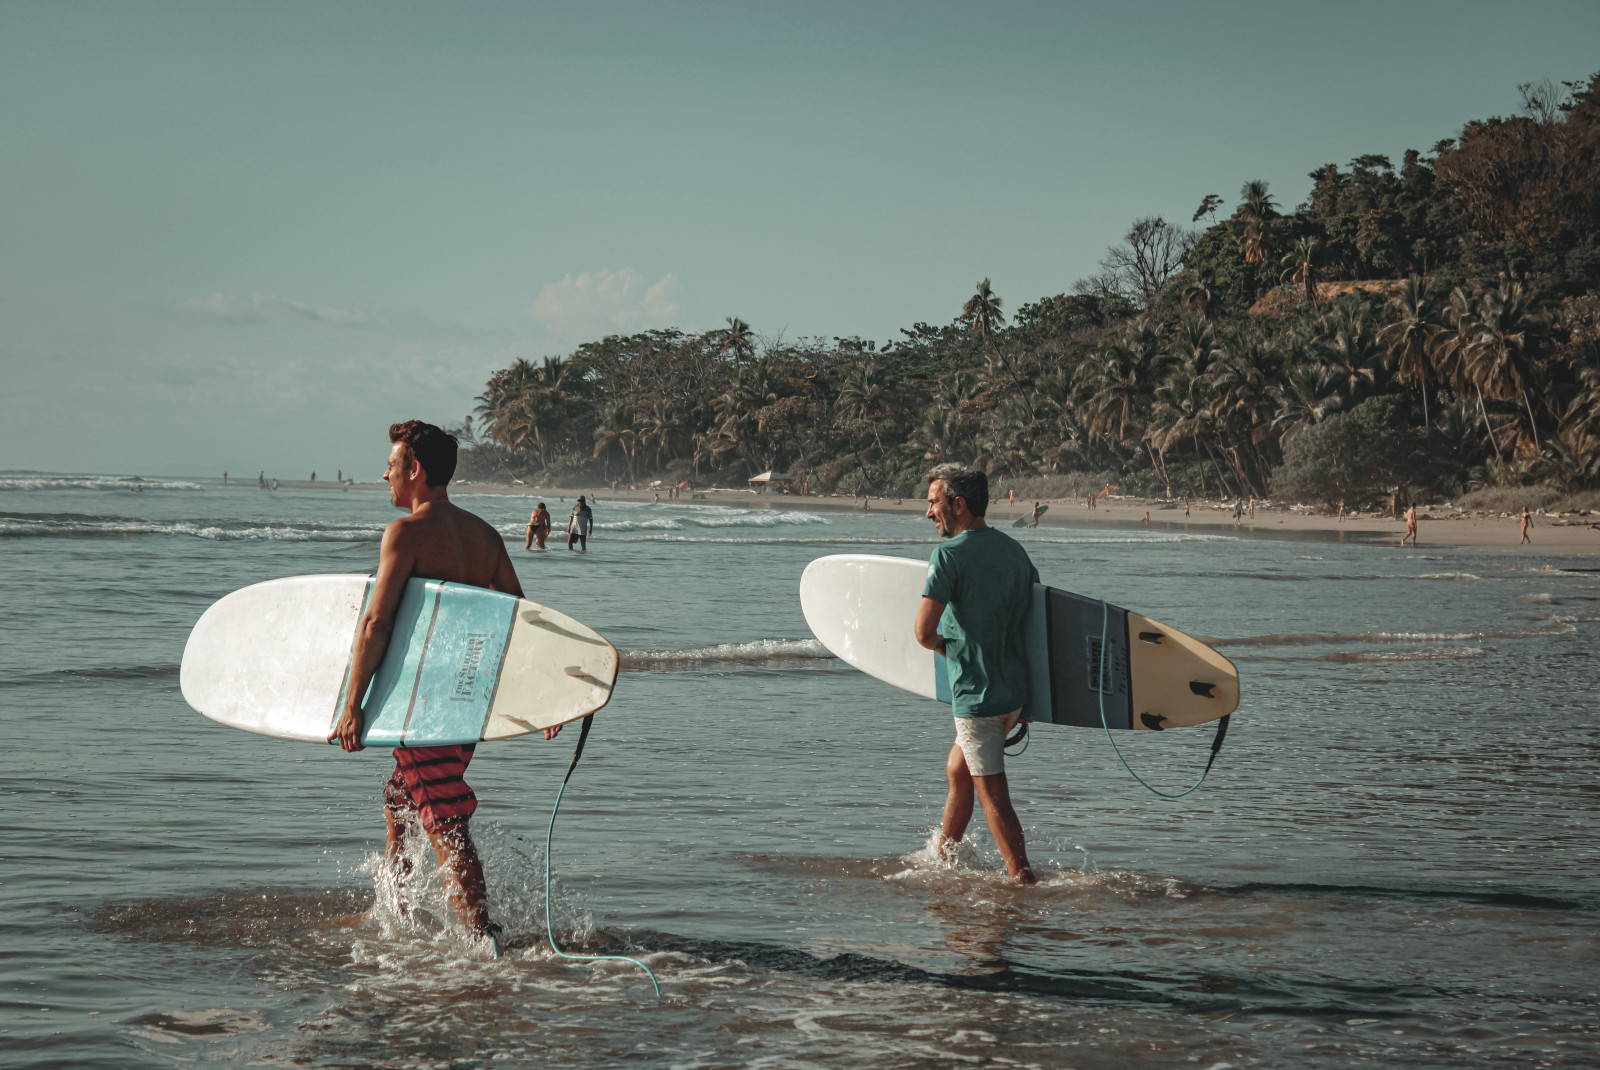 Two surfers in Costa Rica with white and blue surfboards walking in shallow blue water with green lush trees in the background.